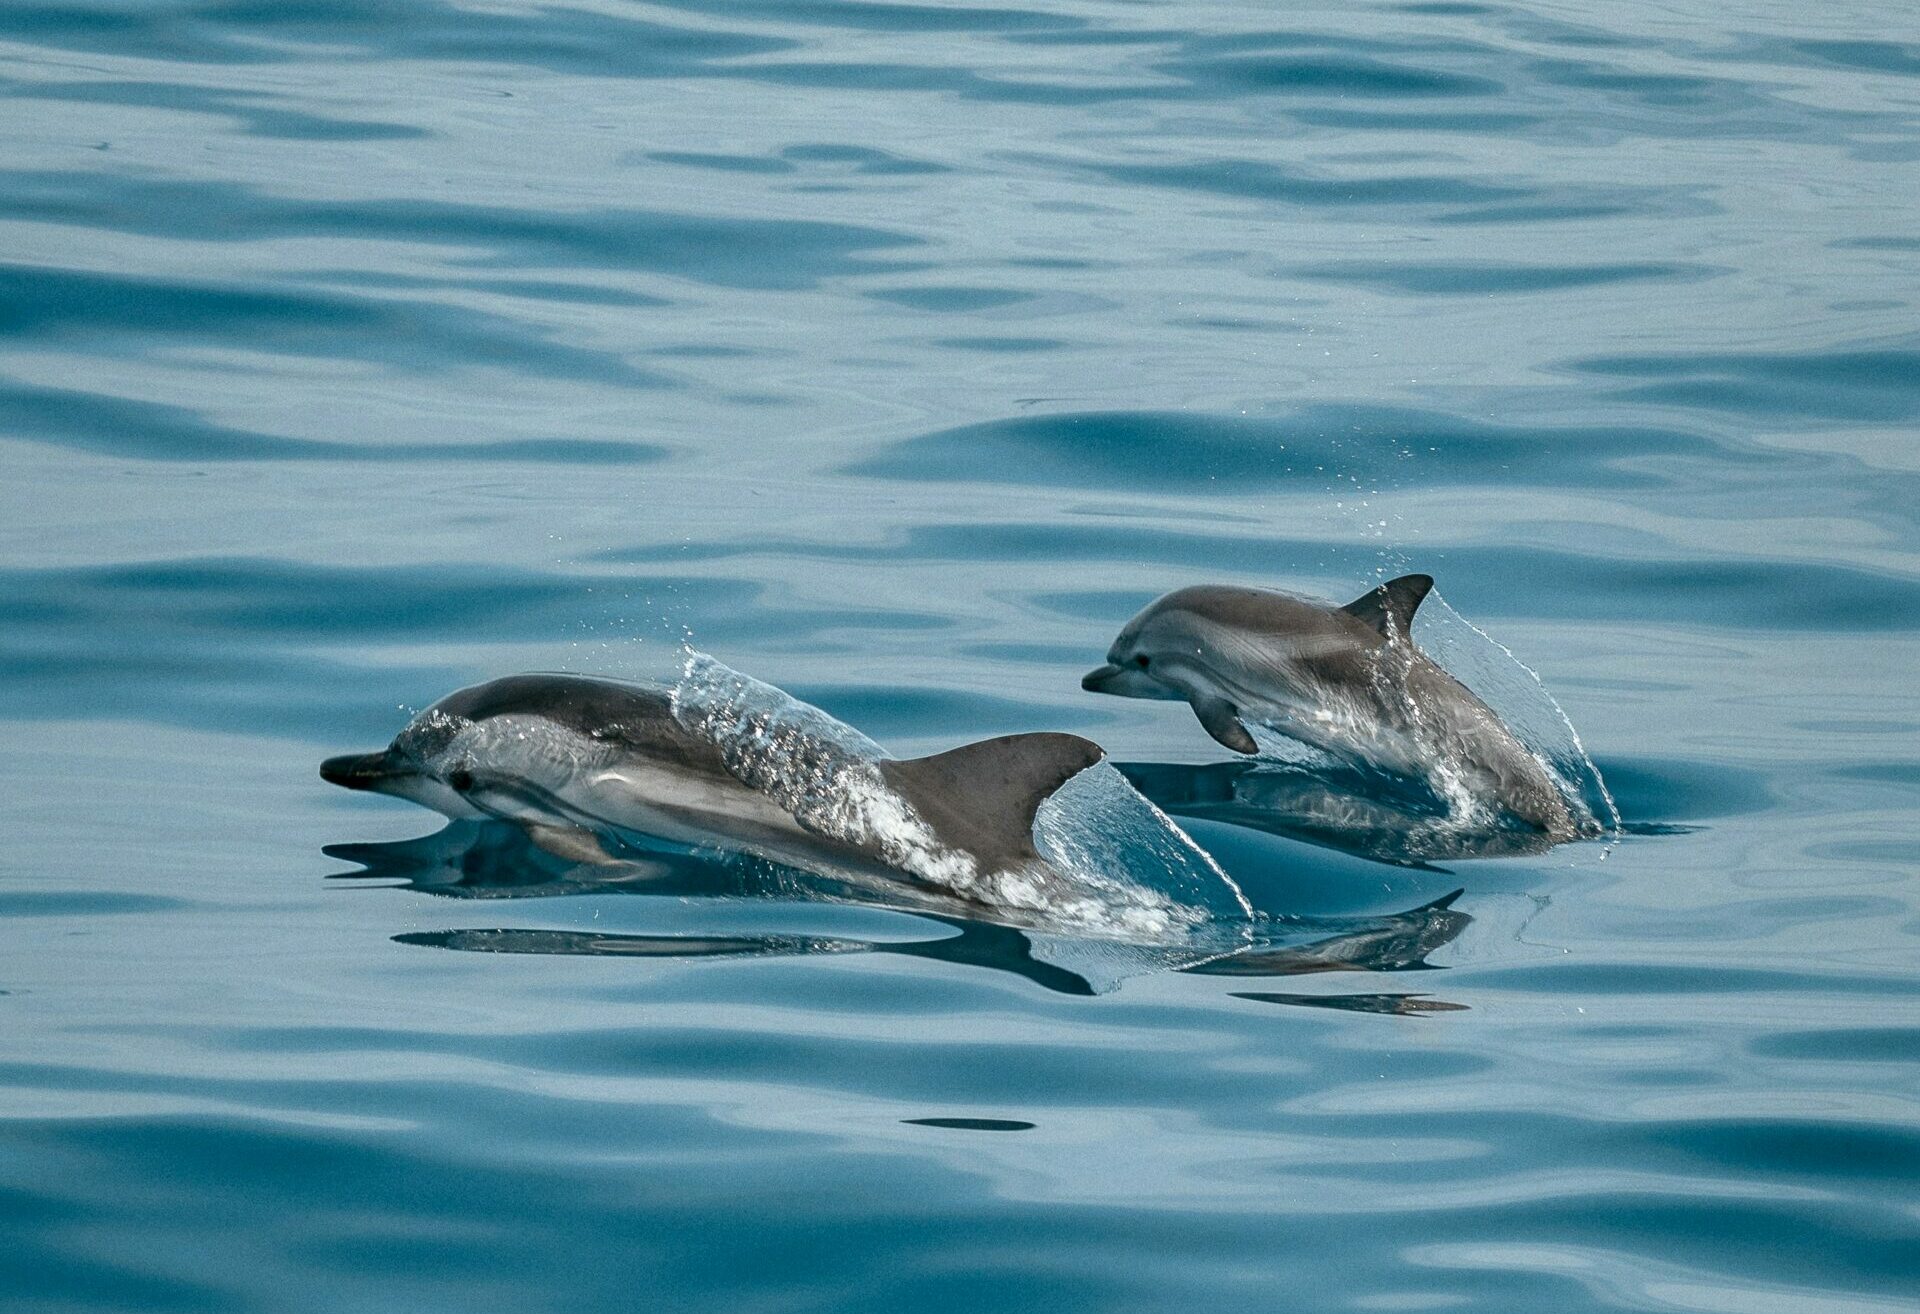 Travel operators caught in dolphin hunting scandal